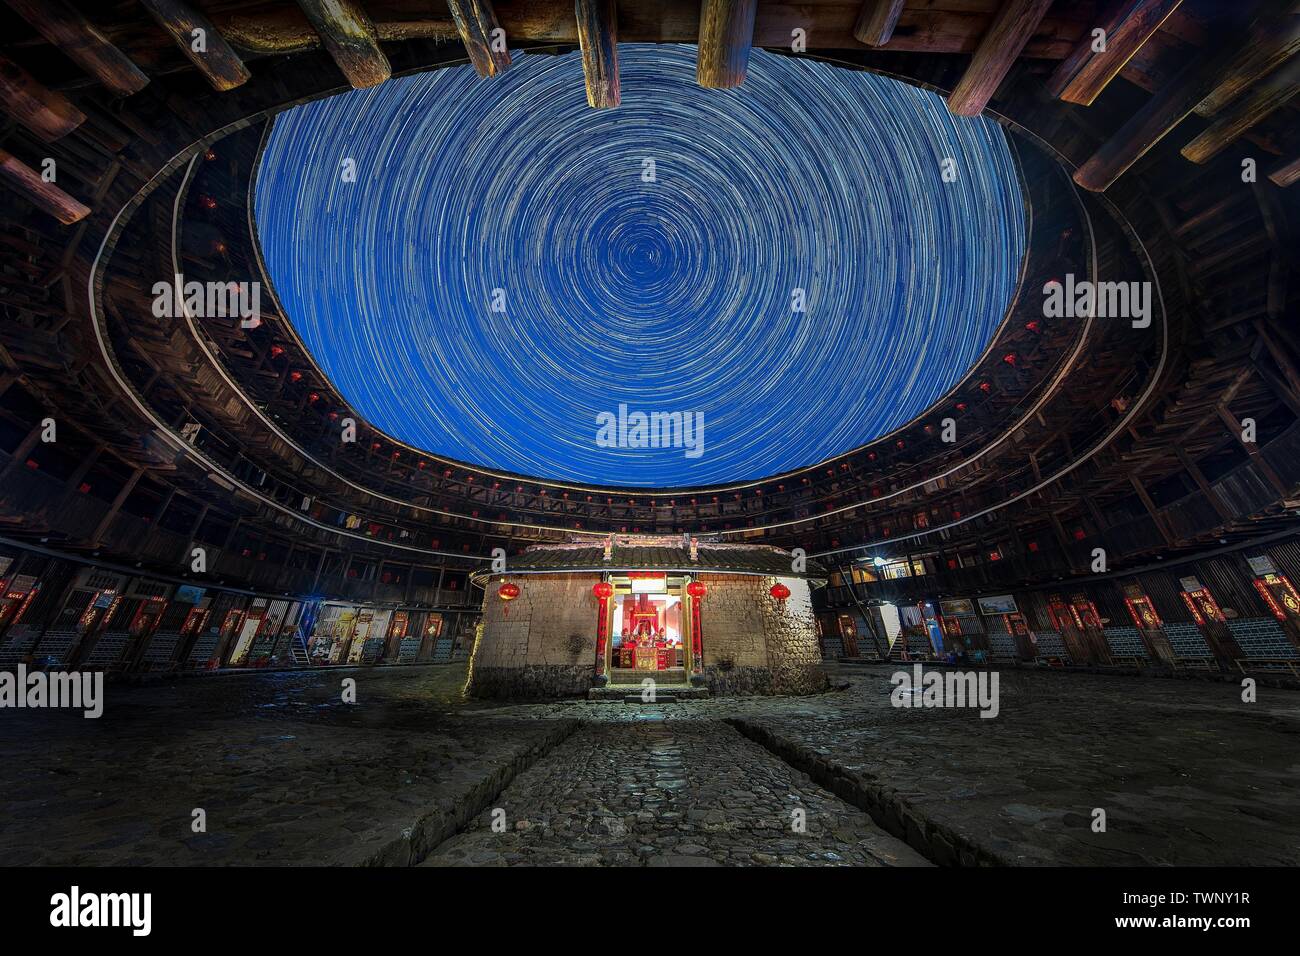 June 20, 2019, Fujian, China: The stars spin about during a long time exposure of the Fujian Hakka Tulou,  a unique mountain dwelling building in Fujian province, China. It is known as the ''Oriental ancient castle'' and the ''world architectural wonder''. Circular Tulou is a model residence for Hakka people. The Tulou buildings have become the most attractive tourist attraction in the region and are listed as a world cultural heritage site, attracting more and more foreign tourists. (Credit Image: © SIPA Asia via ZUMA Wire) Stock Photo